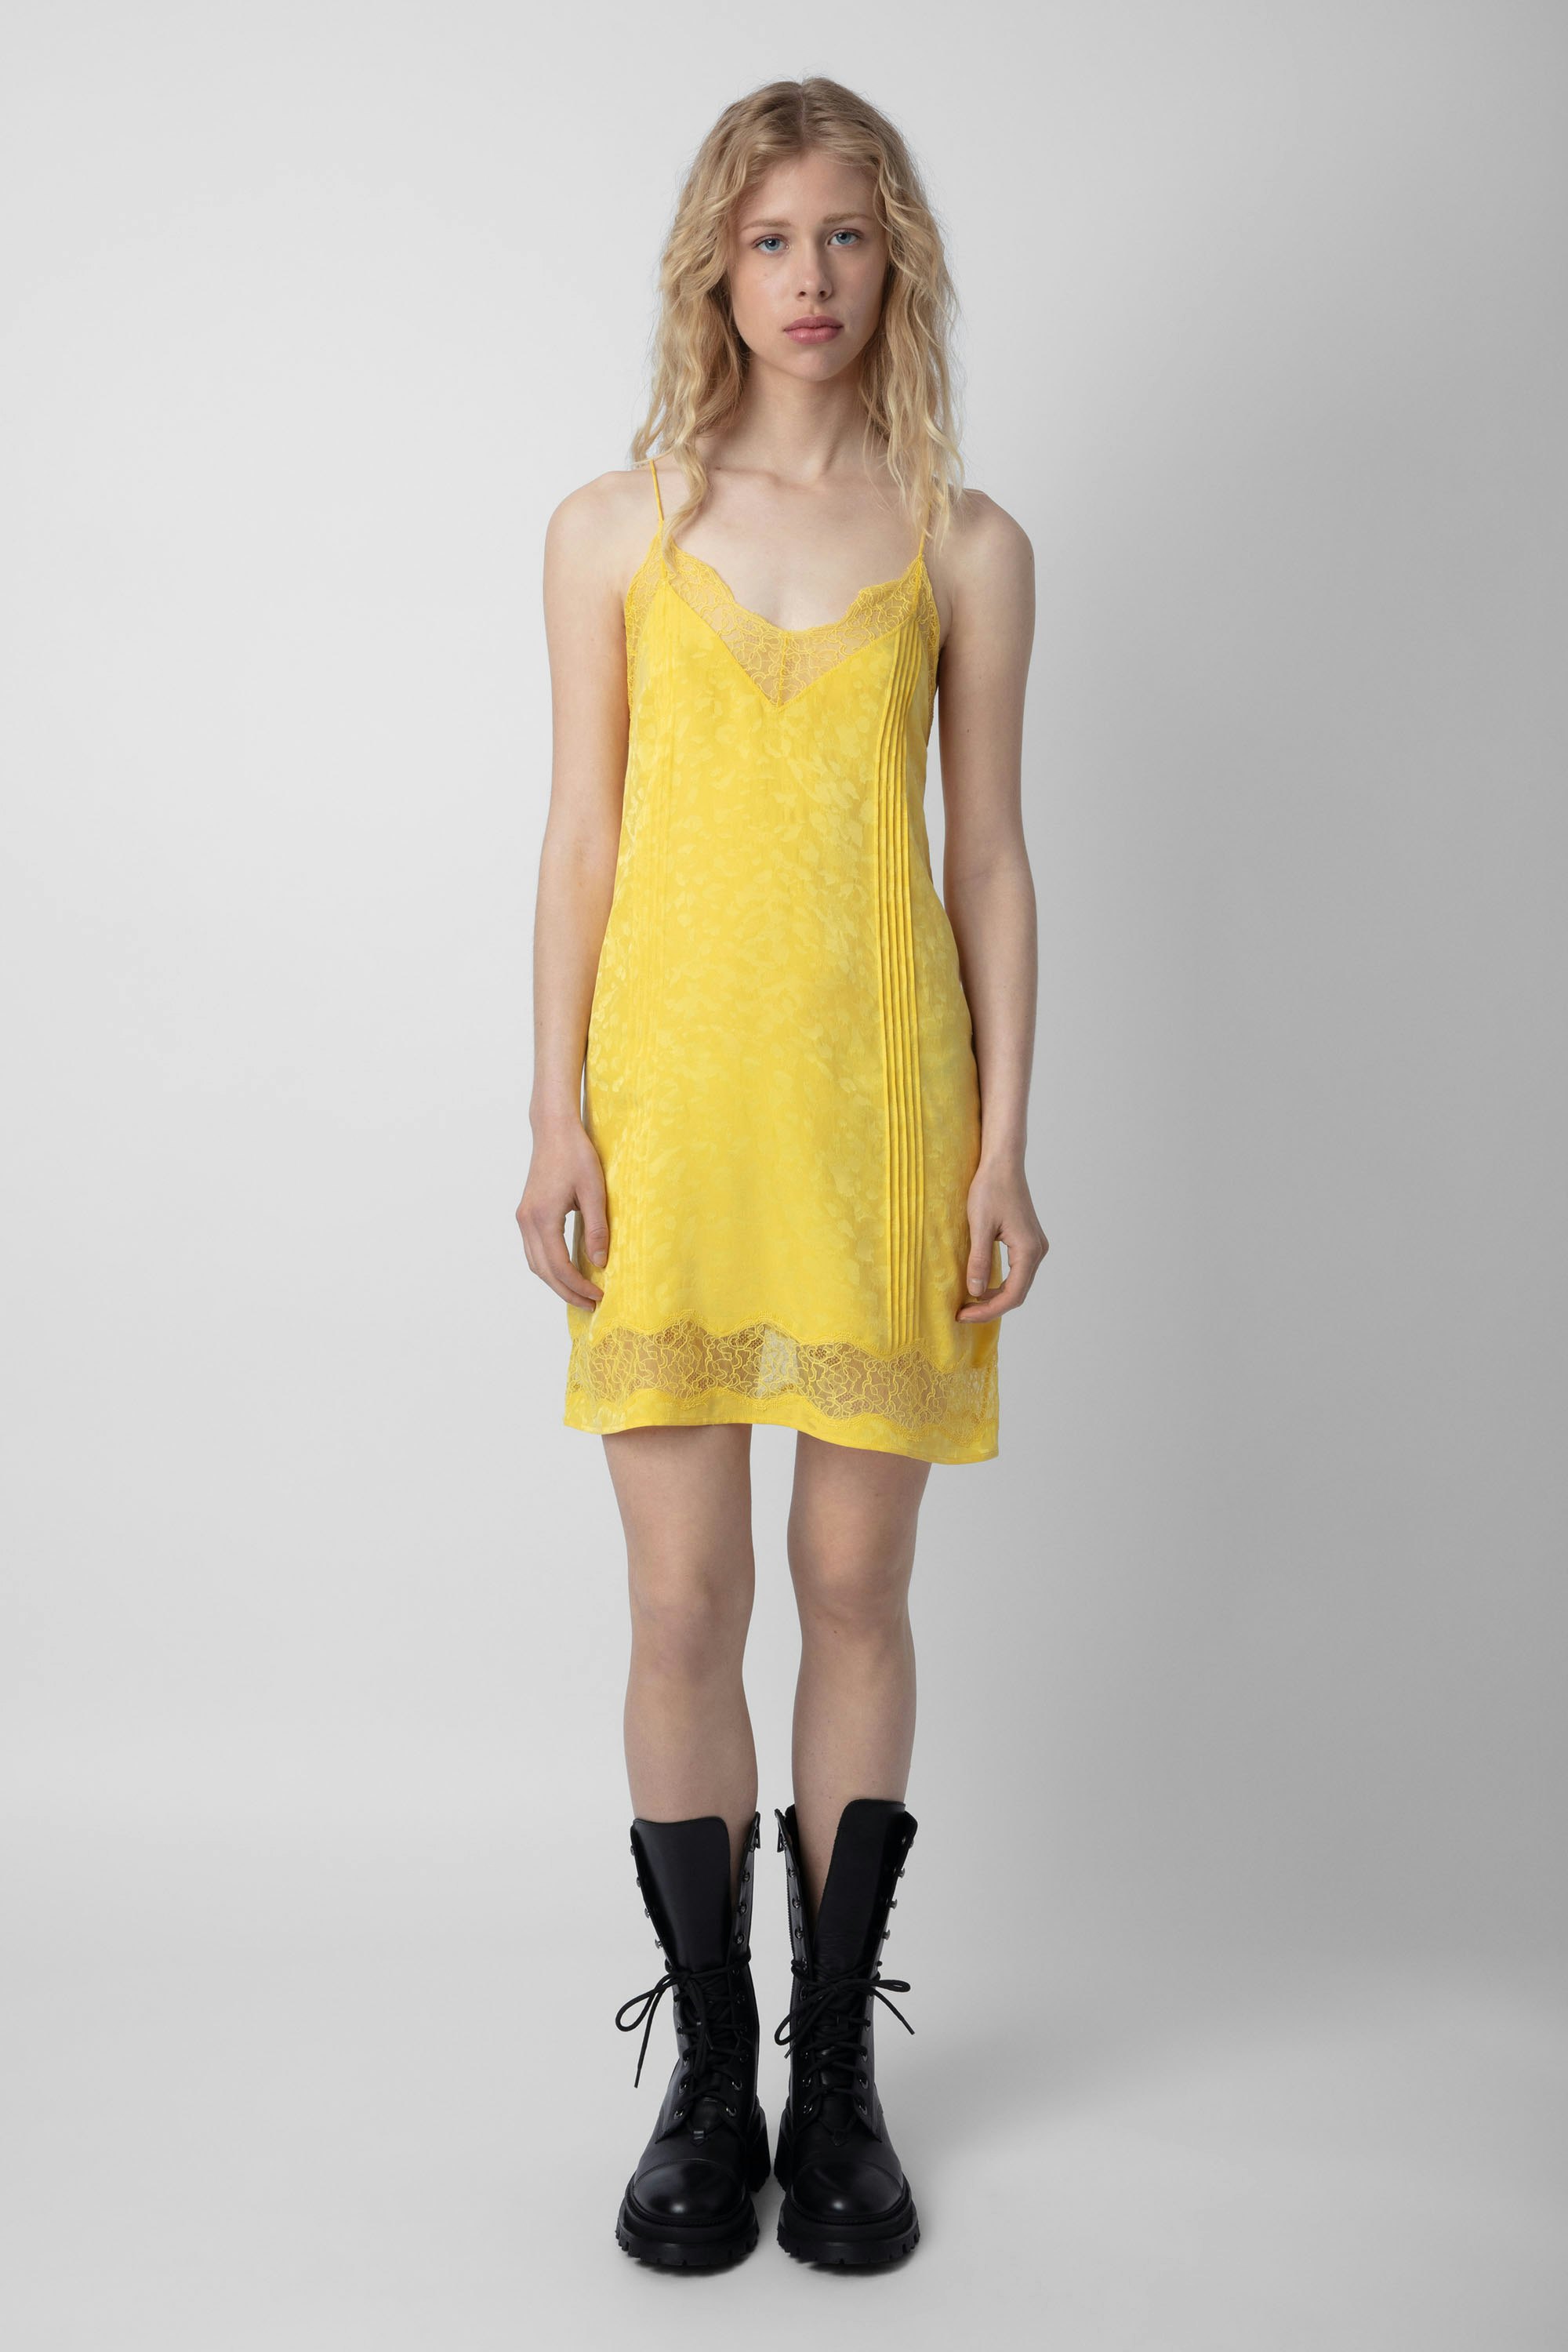 Crystal Silk Jacquard Dress - Yellow leopard jacquard silk short dress with crossover back and lace strips.